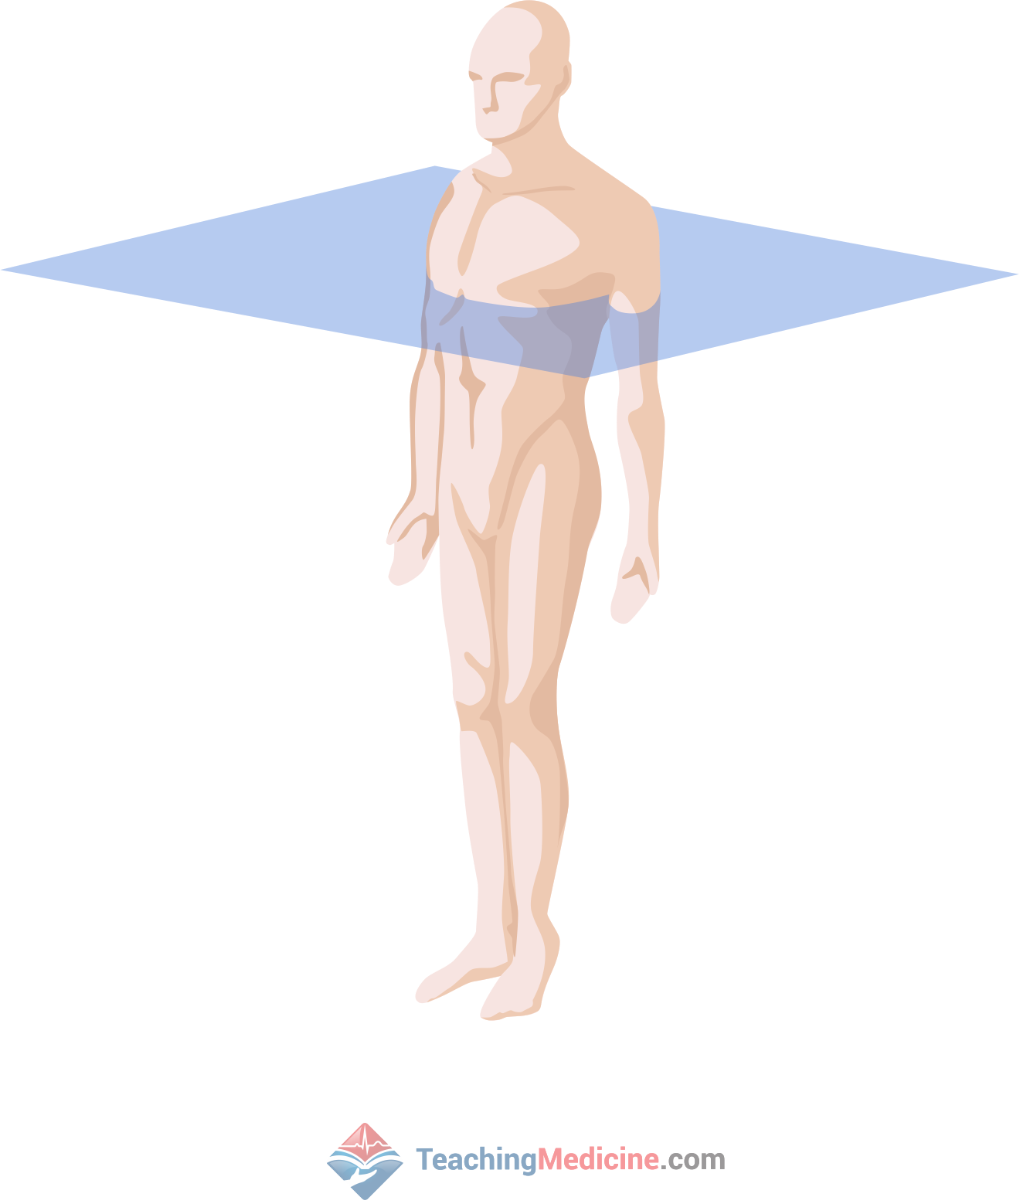 The axial plane measures in a left-right (or right-left) direction as well as a front-back direction